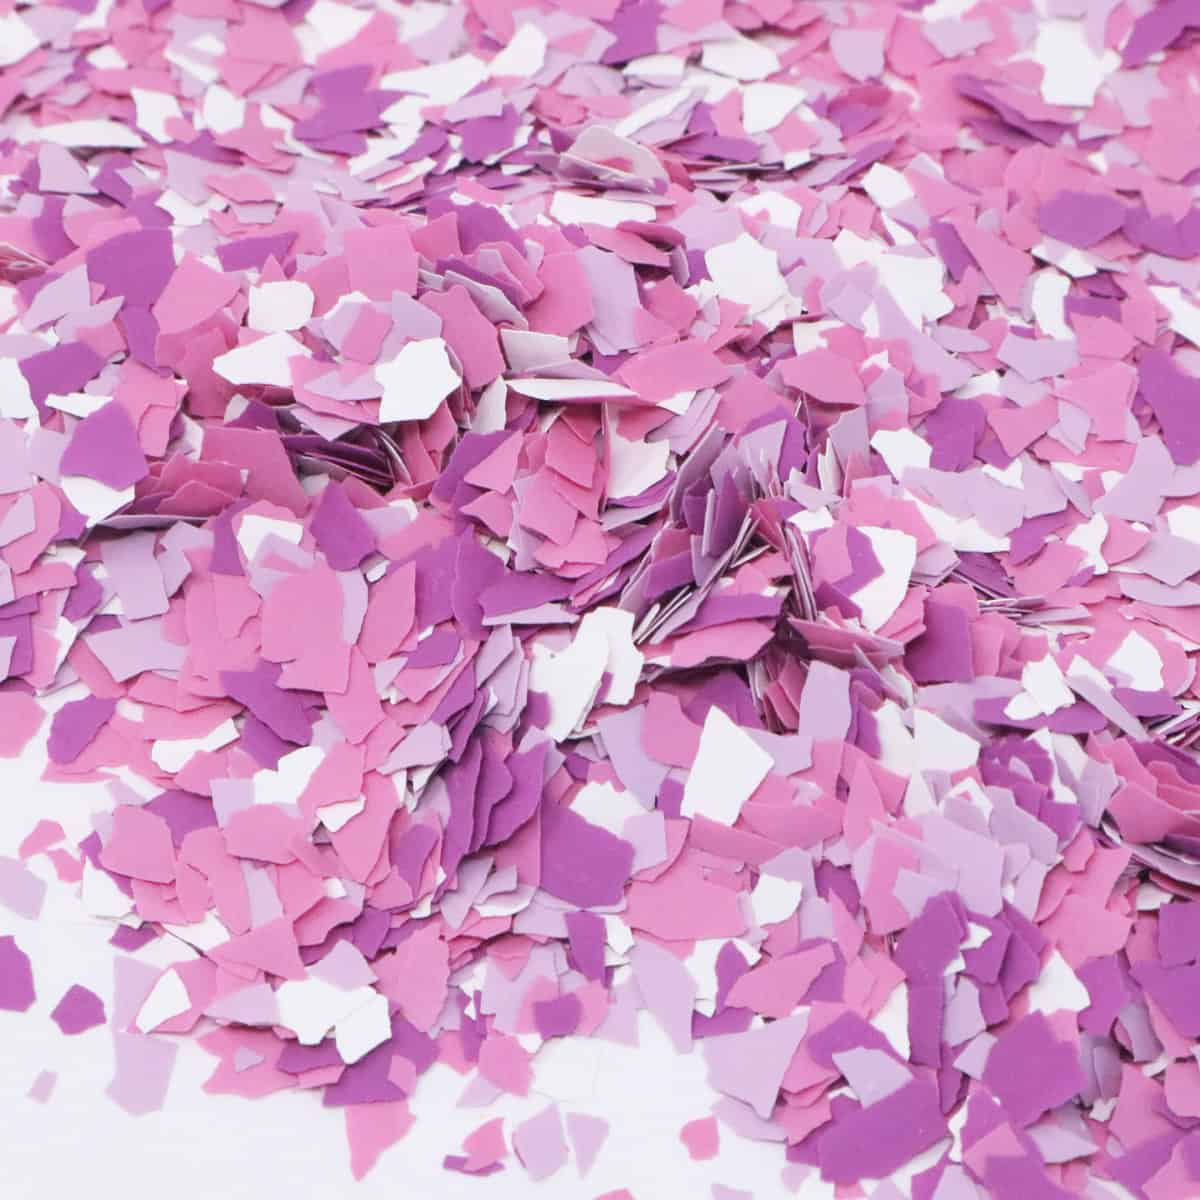 Pink decorative chips